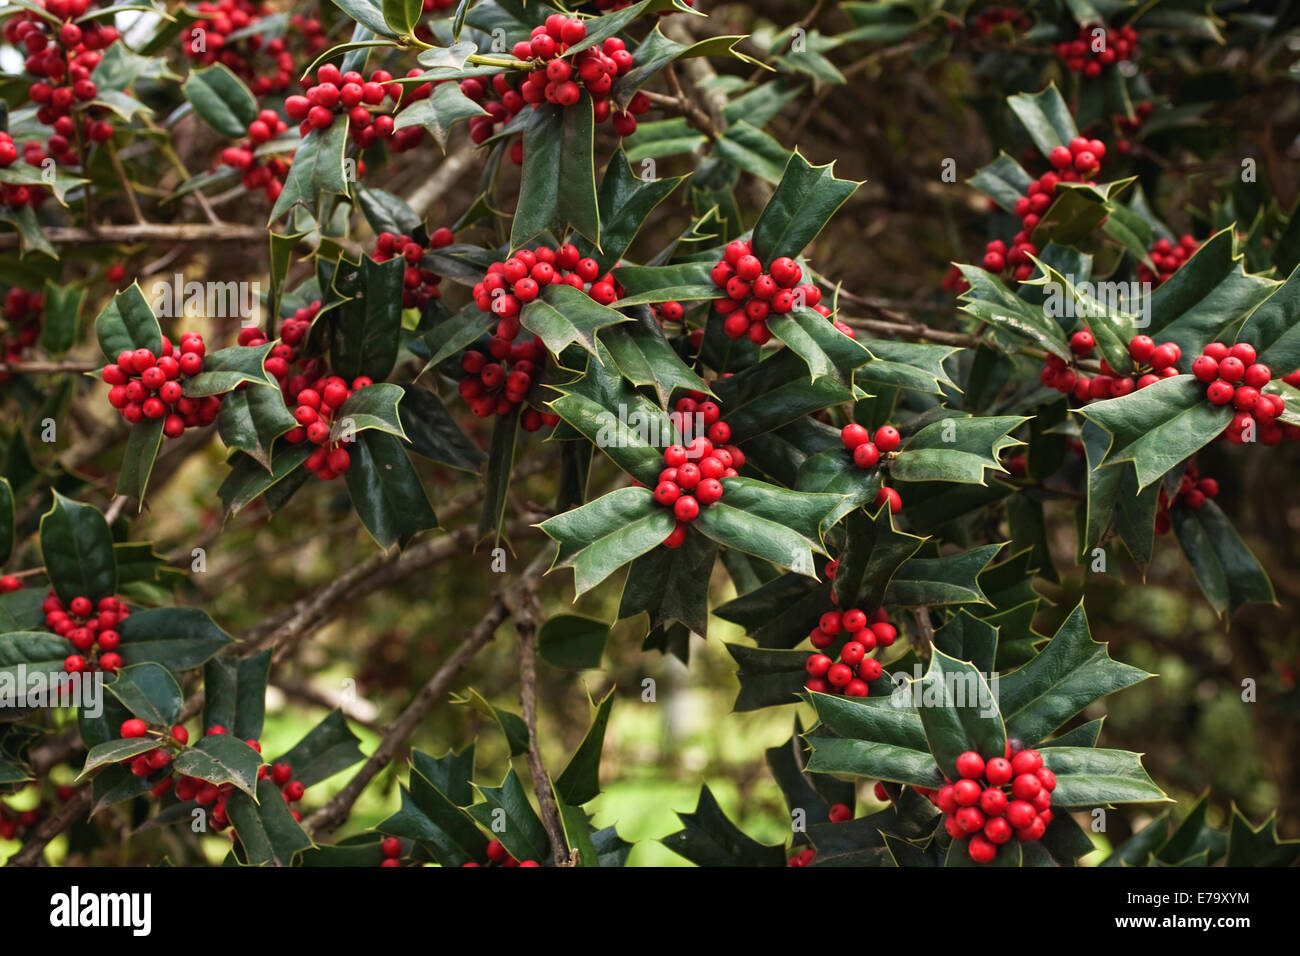 Holly bush with bright red berries close up Stock Photo